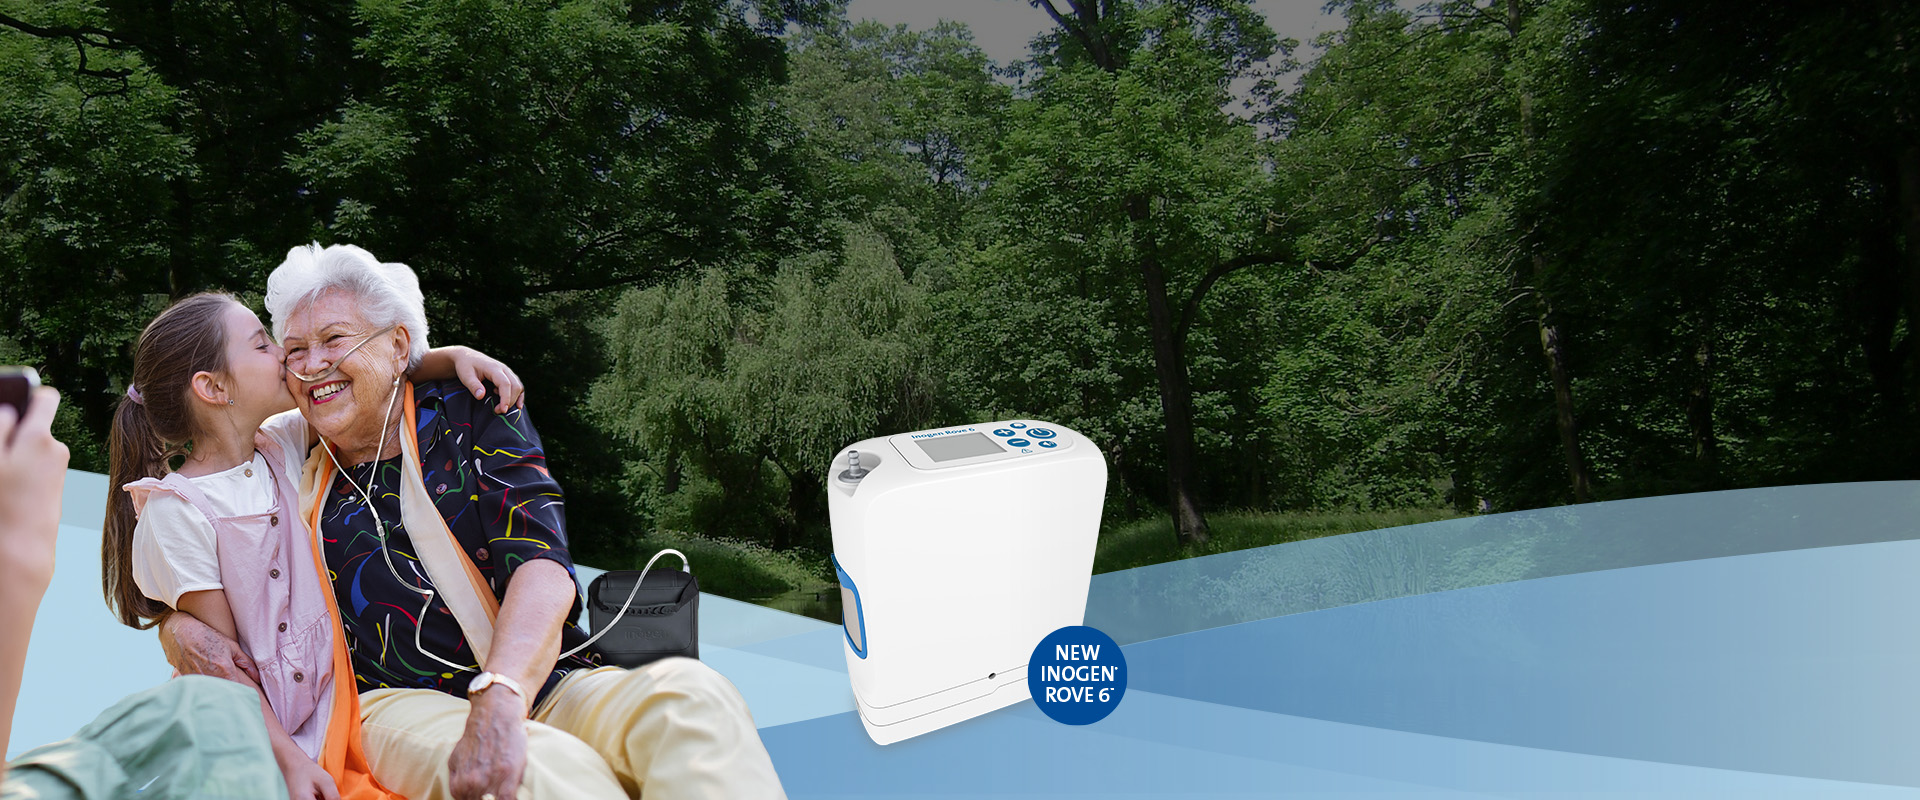 Grandma and granddaughter posing with Inogen Portable Oxygen Concentrator